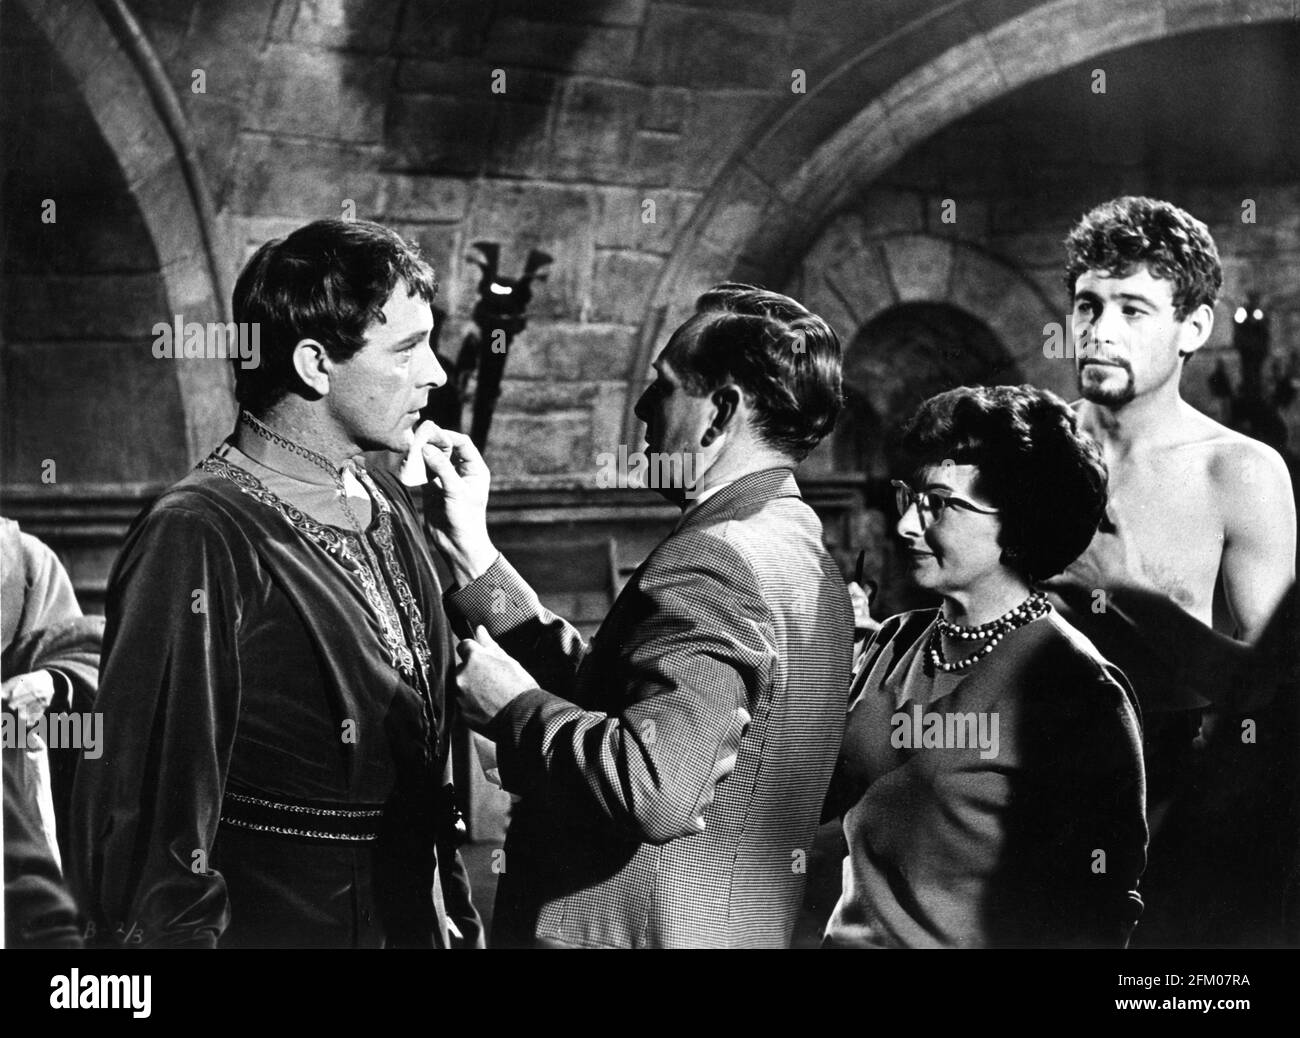 RICHARD BURTON has his make-up touched up while PETER O'TOOLE looks on candid on set during filming of BECKET 1964 director PETER GLENVILLE play Jean Anouilh and Lucienne Hill screenplay Edward Anhalt costume design Margaret Furse producer Hal B. Wallis  Wallis-Hazen A Paramount Film Service & Keep Films Co-Production / Paramount Pictures Stock Photo